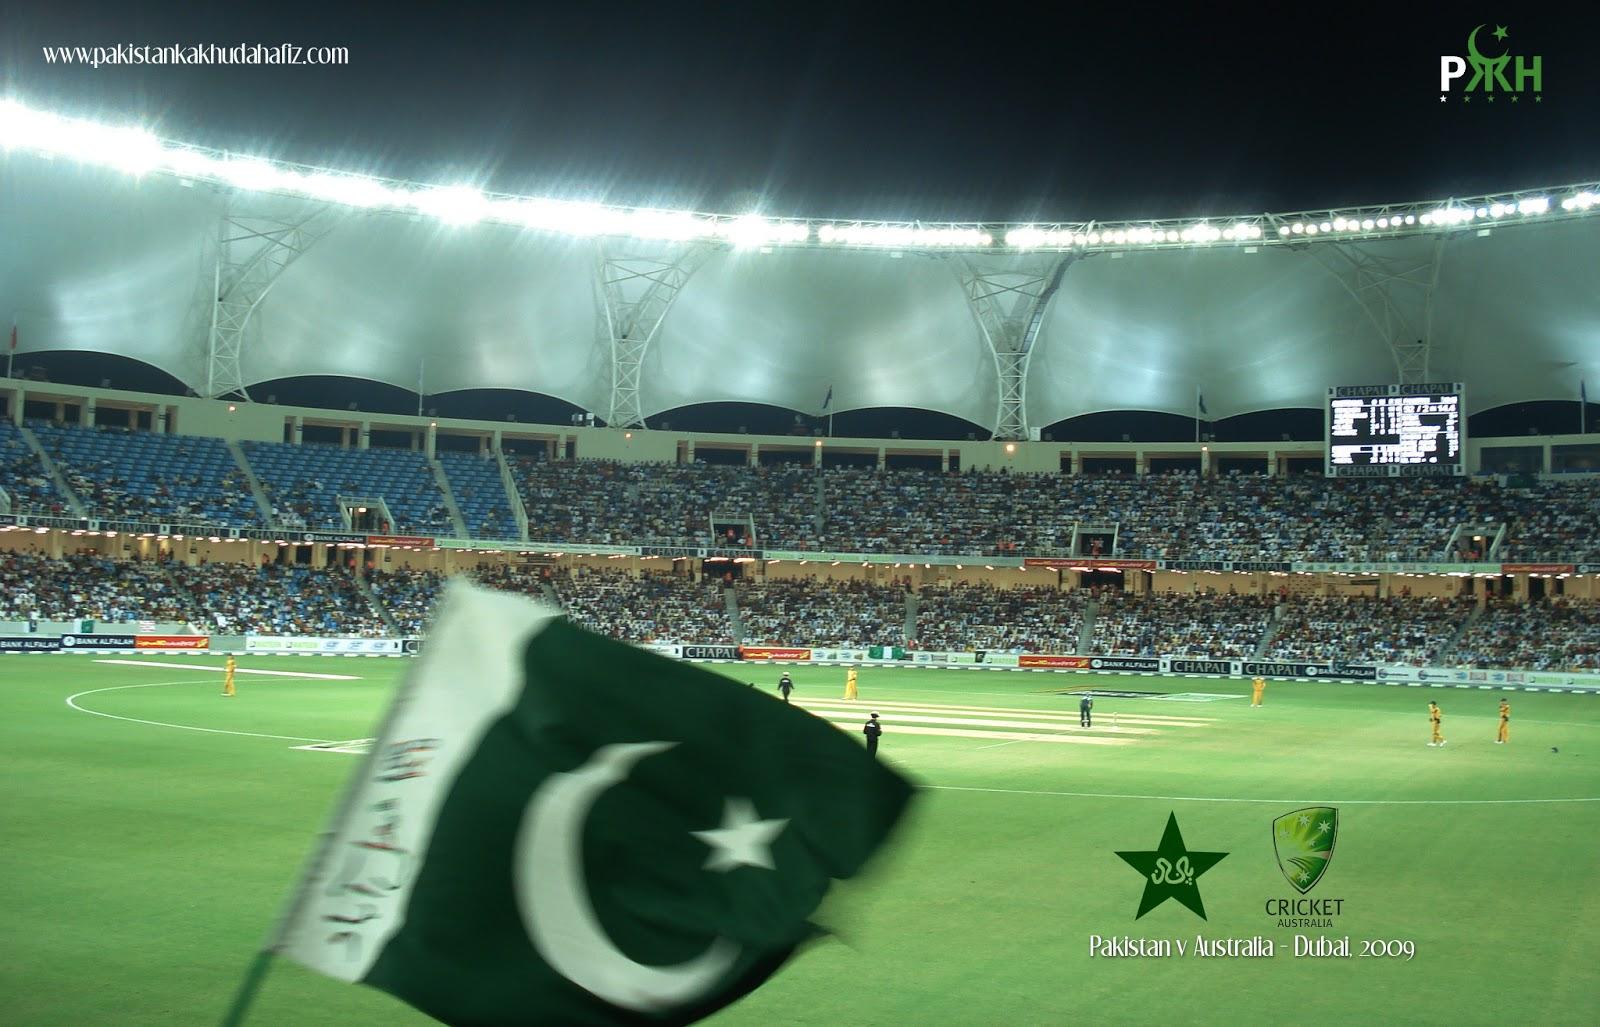 Pakistan to play well to qualify for 2019 ICC World cup